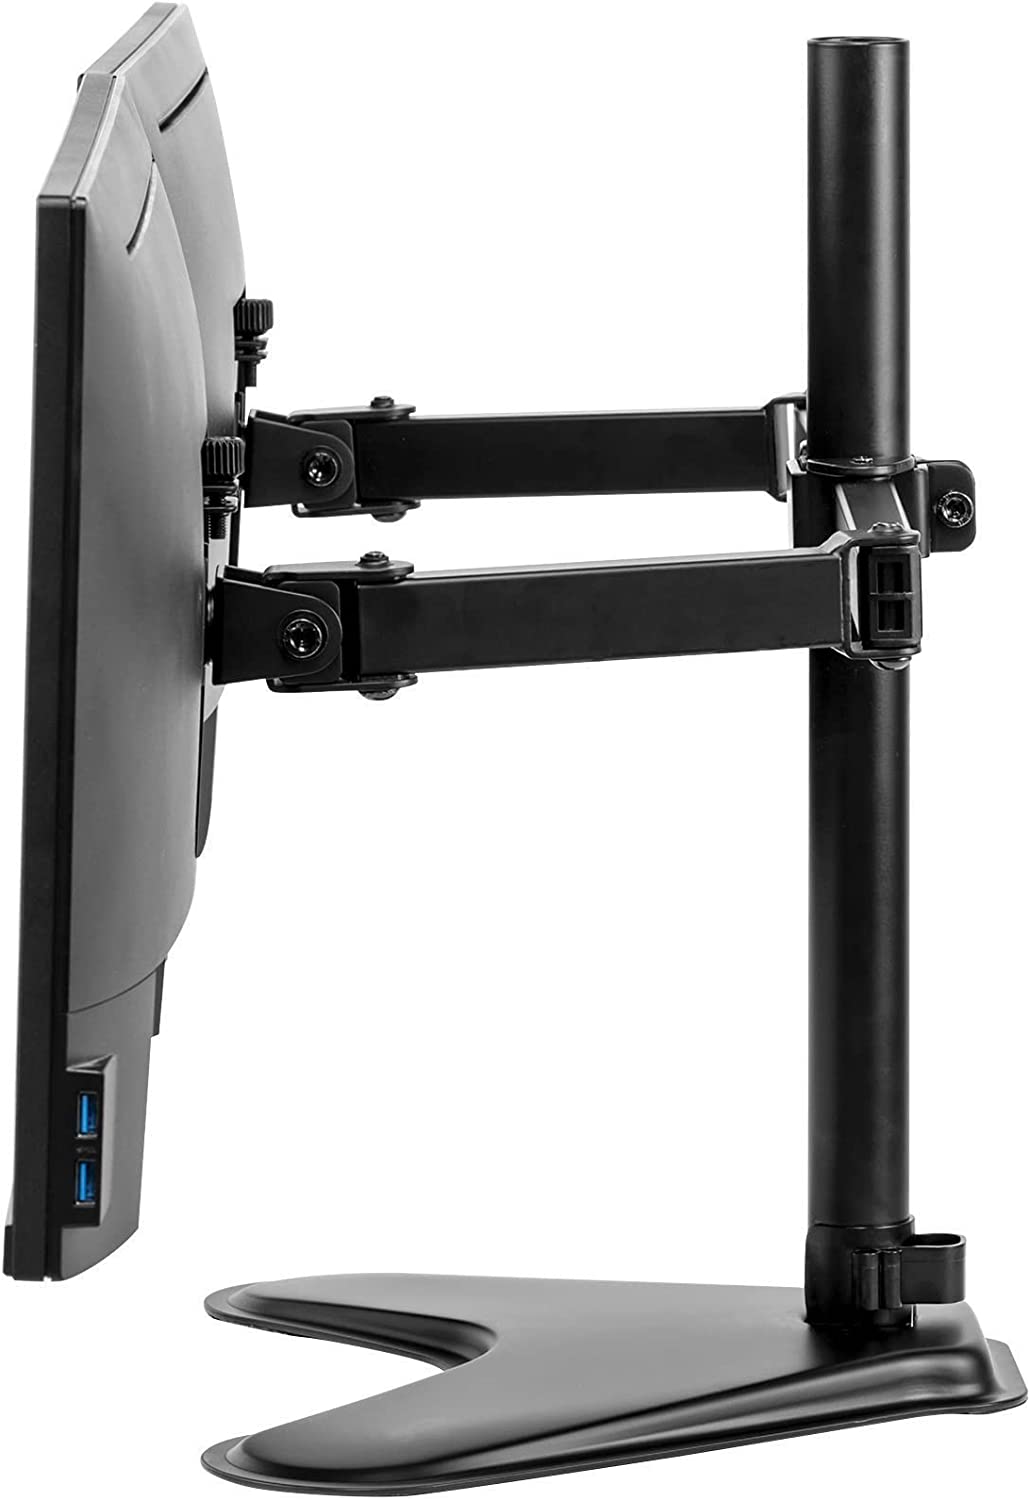 Fellowes 8043701 Professional Series Free Standing Computer Monitor Stand for 2 Monitors with Horizontal Monitor Arms, 27 Inch Monitor Capacity Double Arm